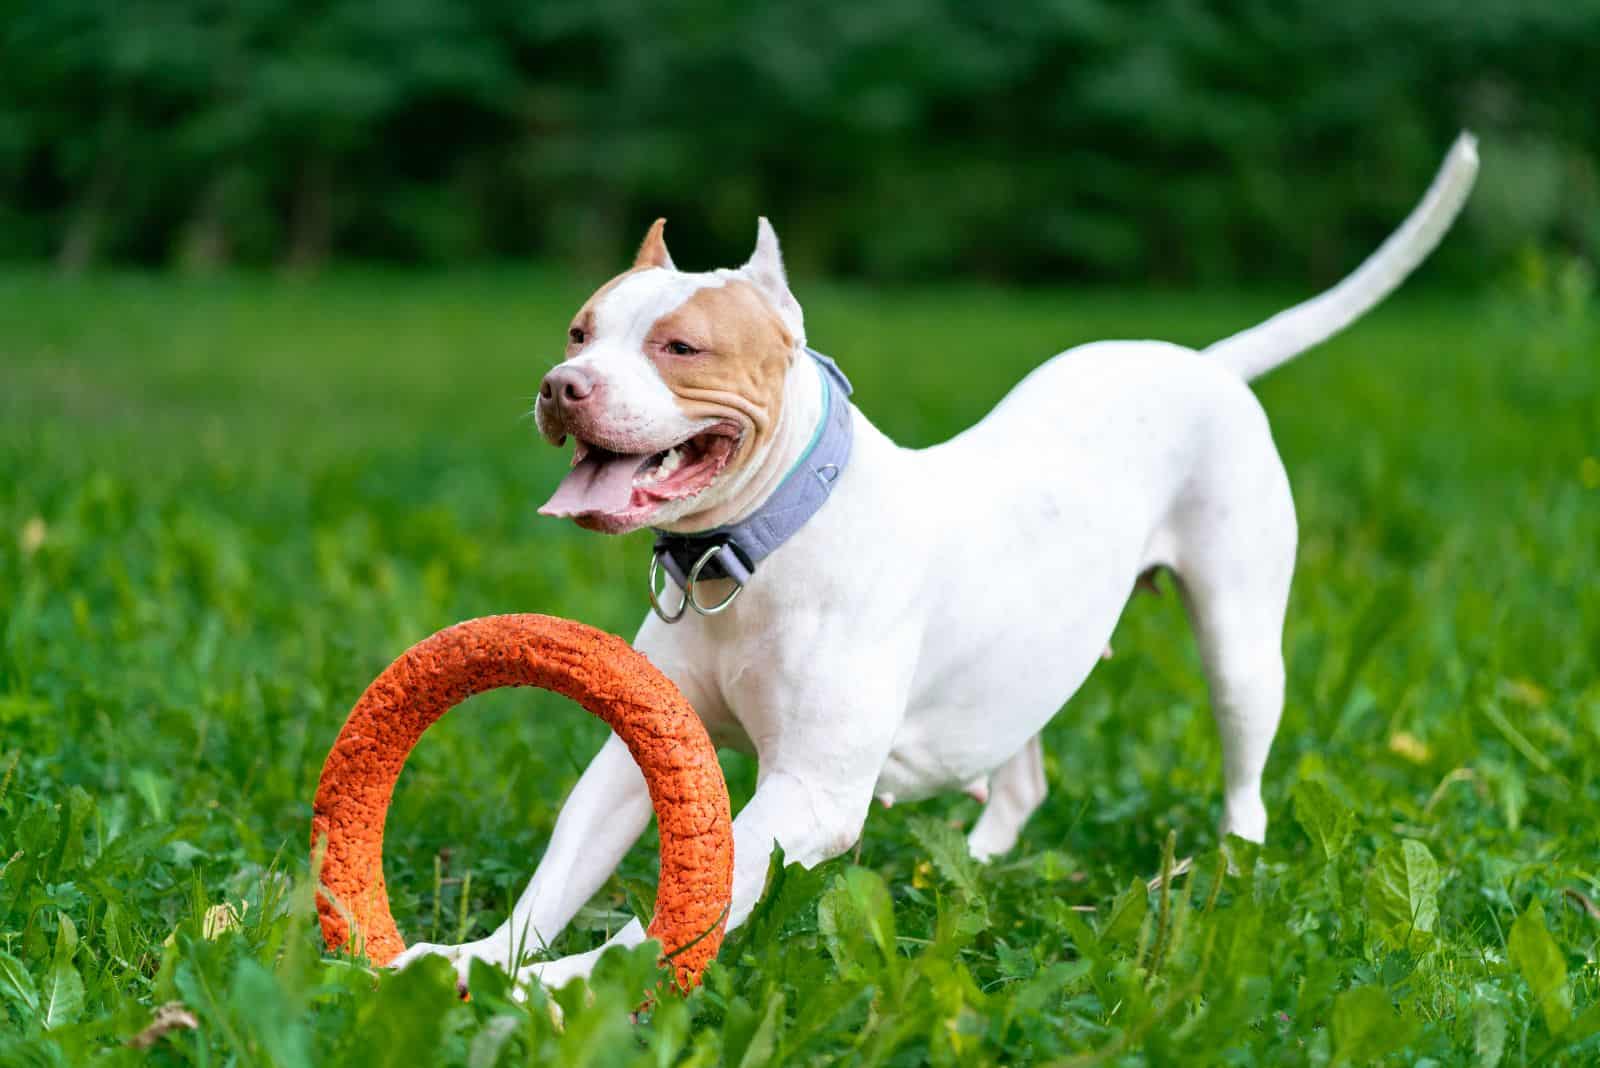 pit bull is playing with a toy on the grass